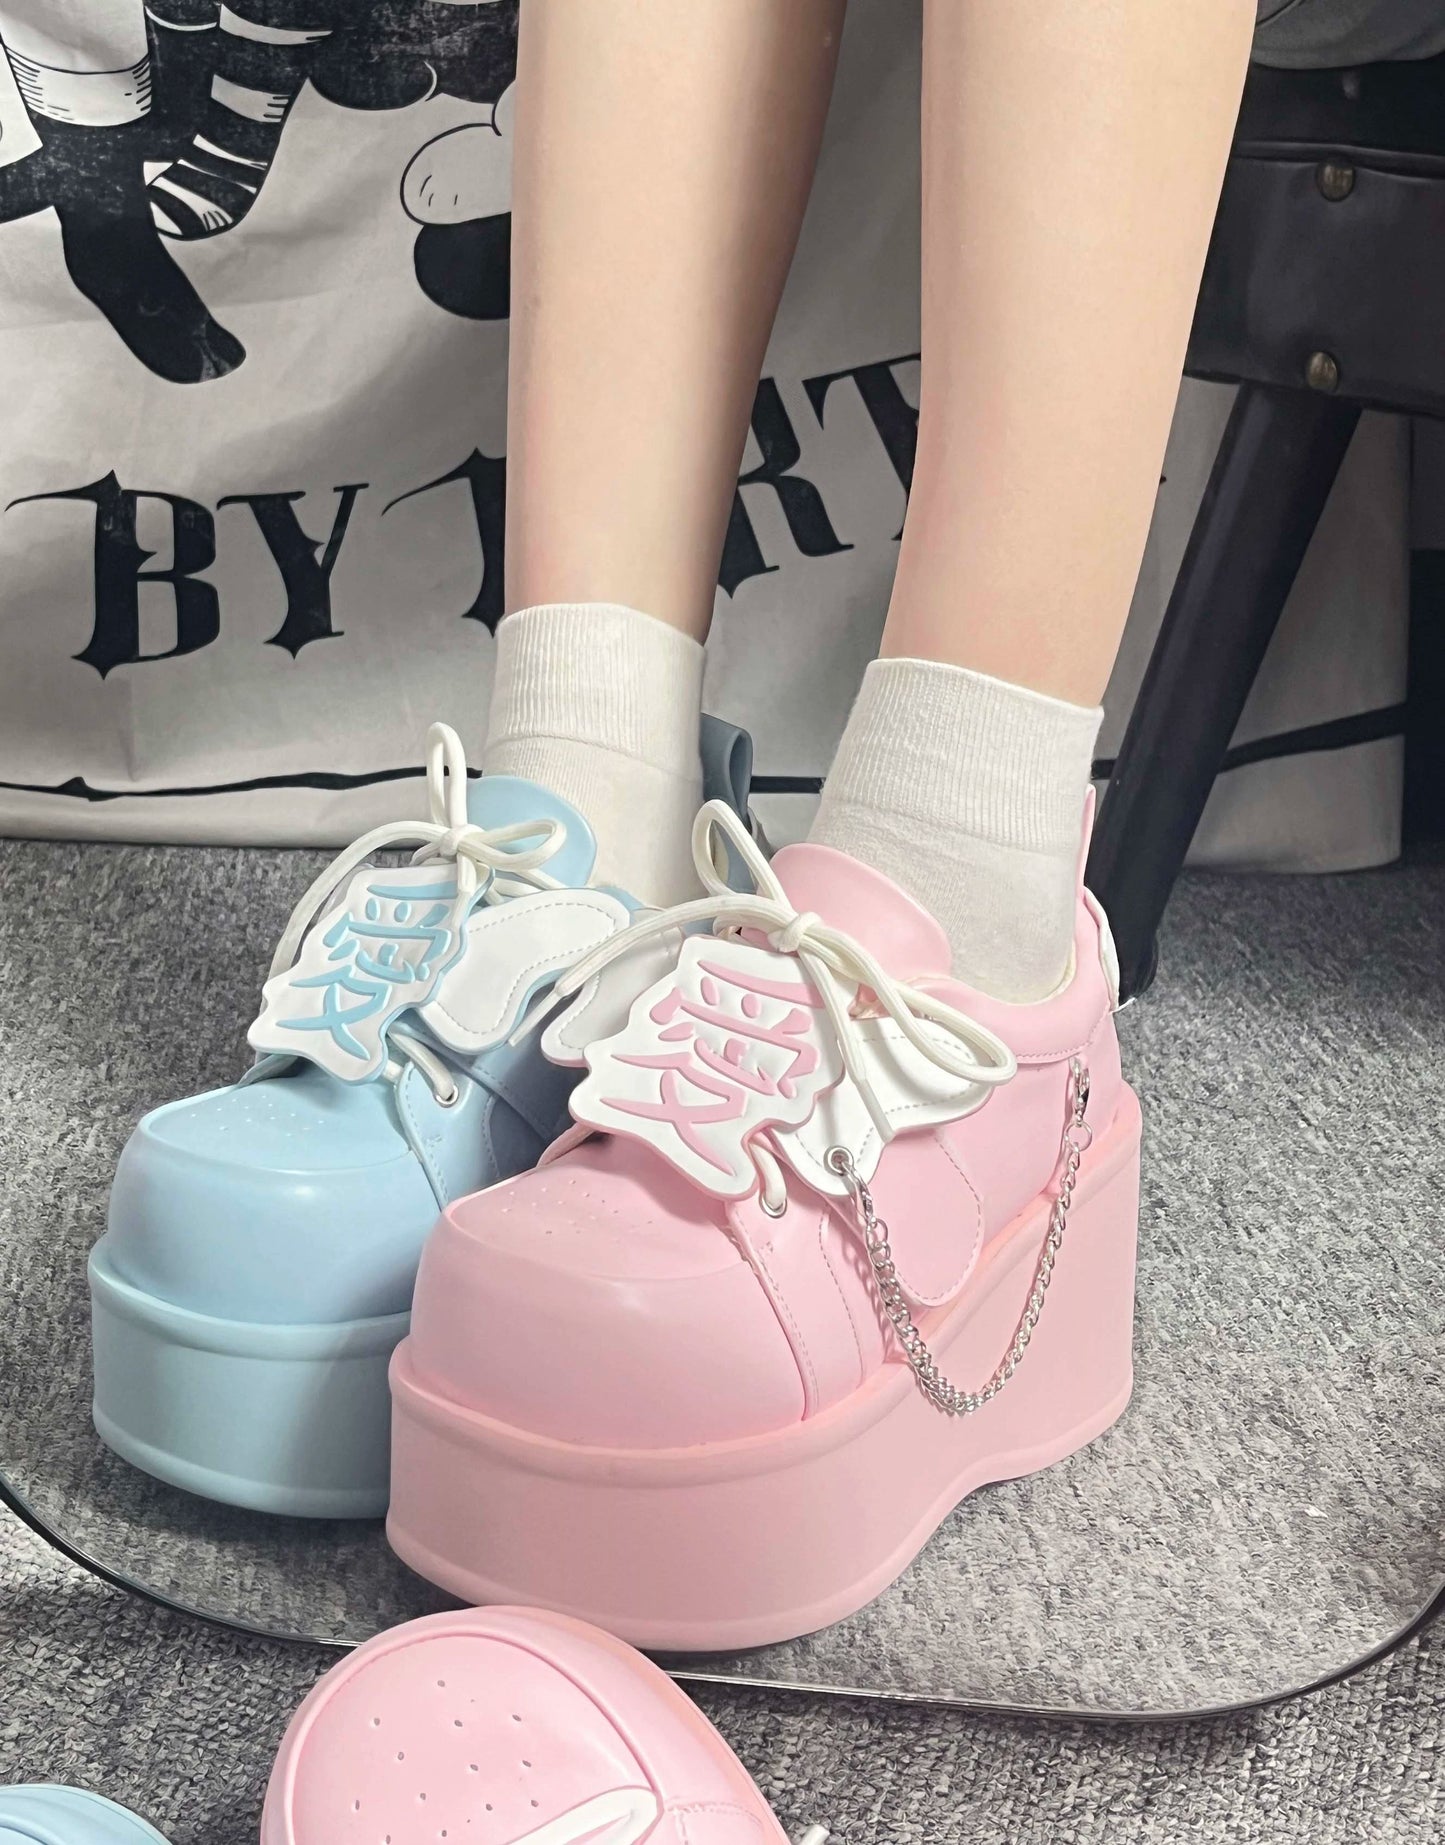 Tenshi Kaiwai Platform Shoes Subculture Thick-soled Shoes 35748:503464 35748:503464